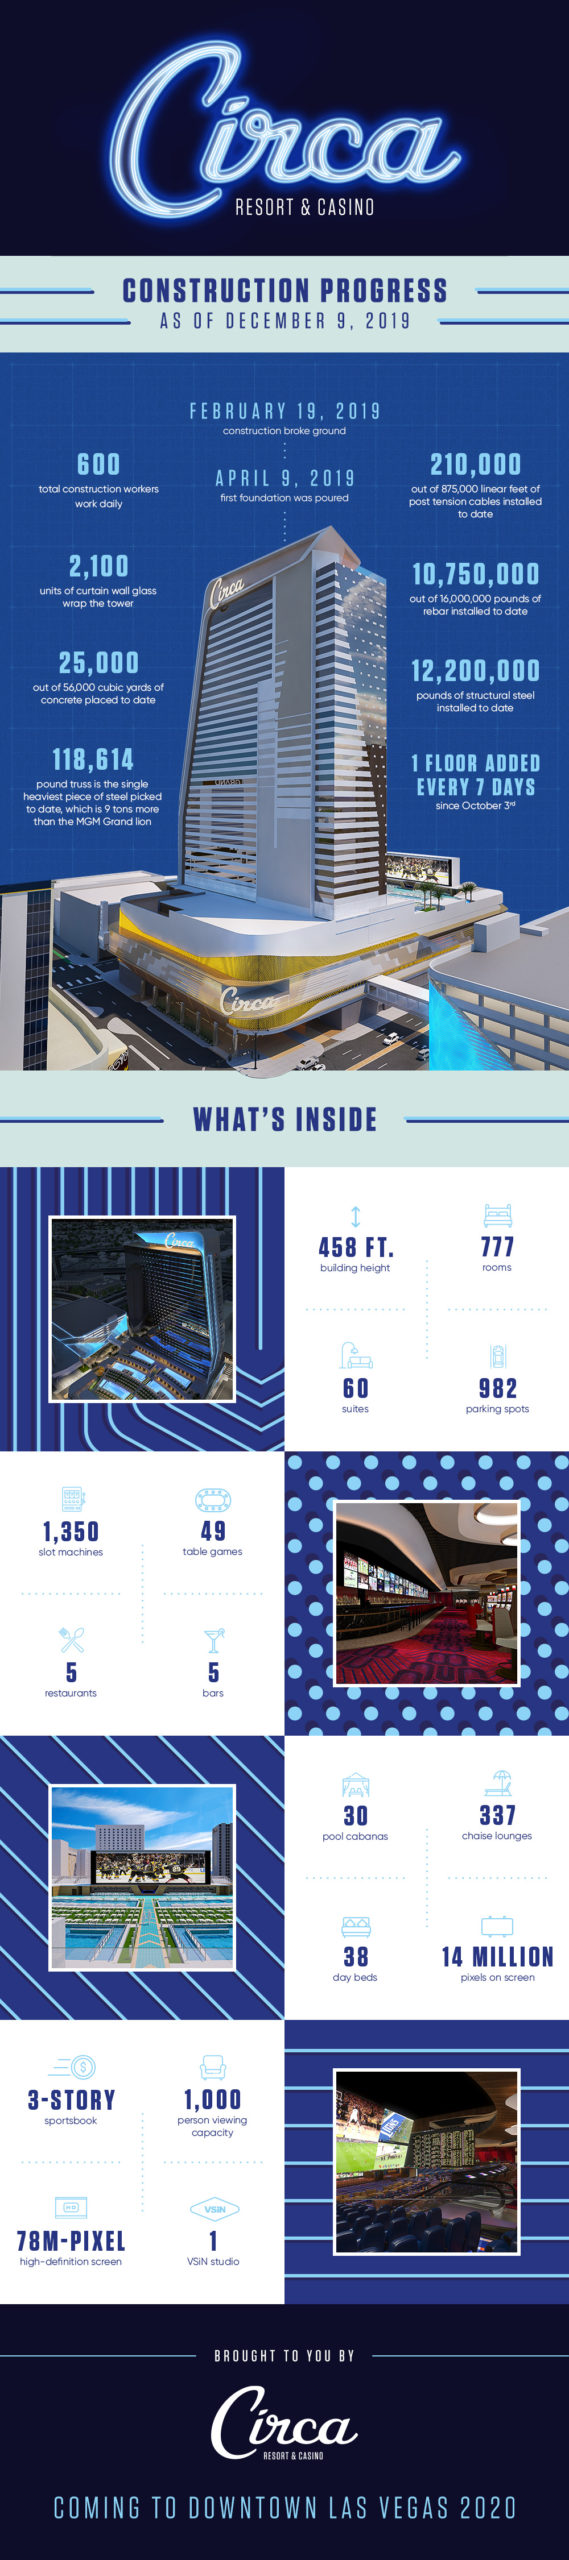 Circa Resort & Casino Las Vegas By the Numbers Infographic